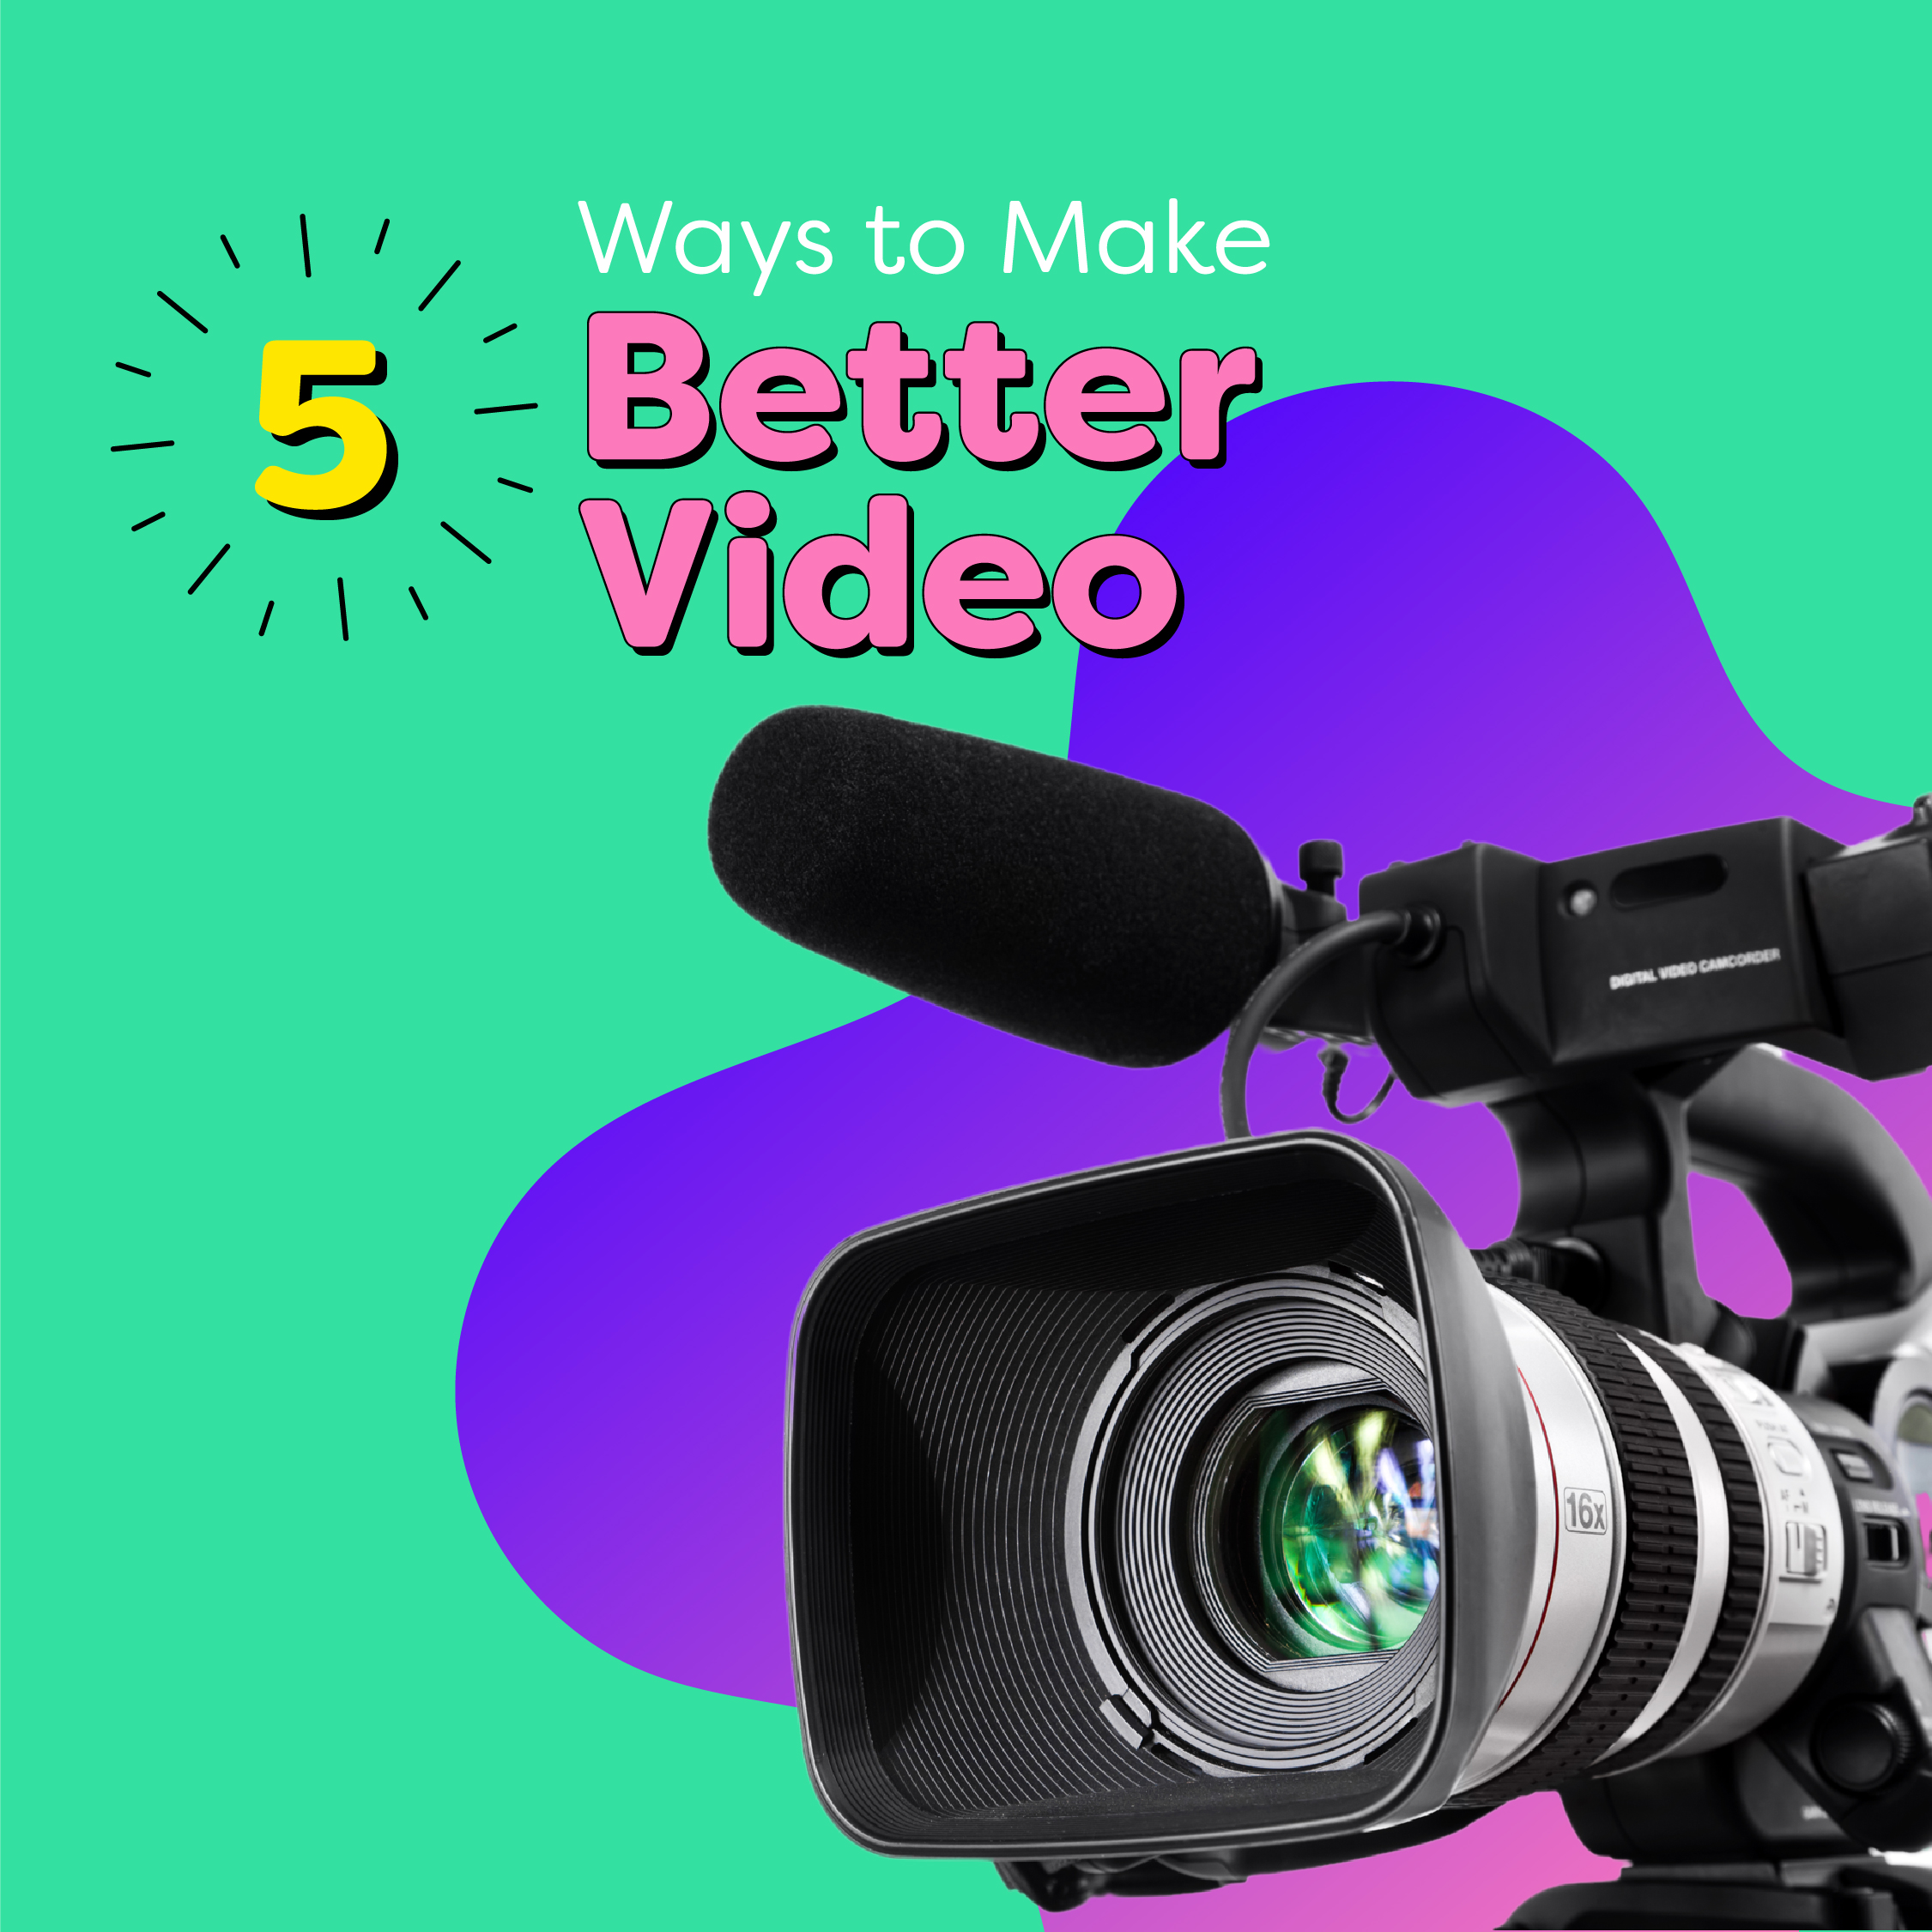 5 ways to make video better